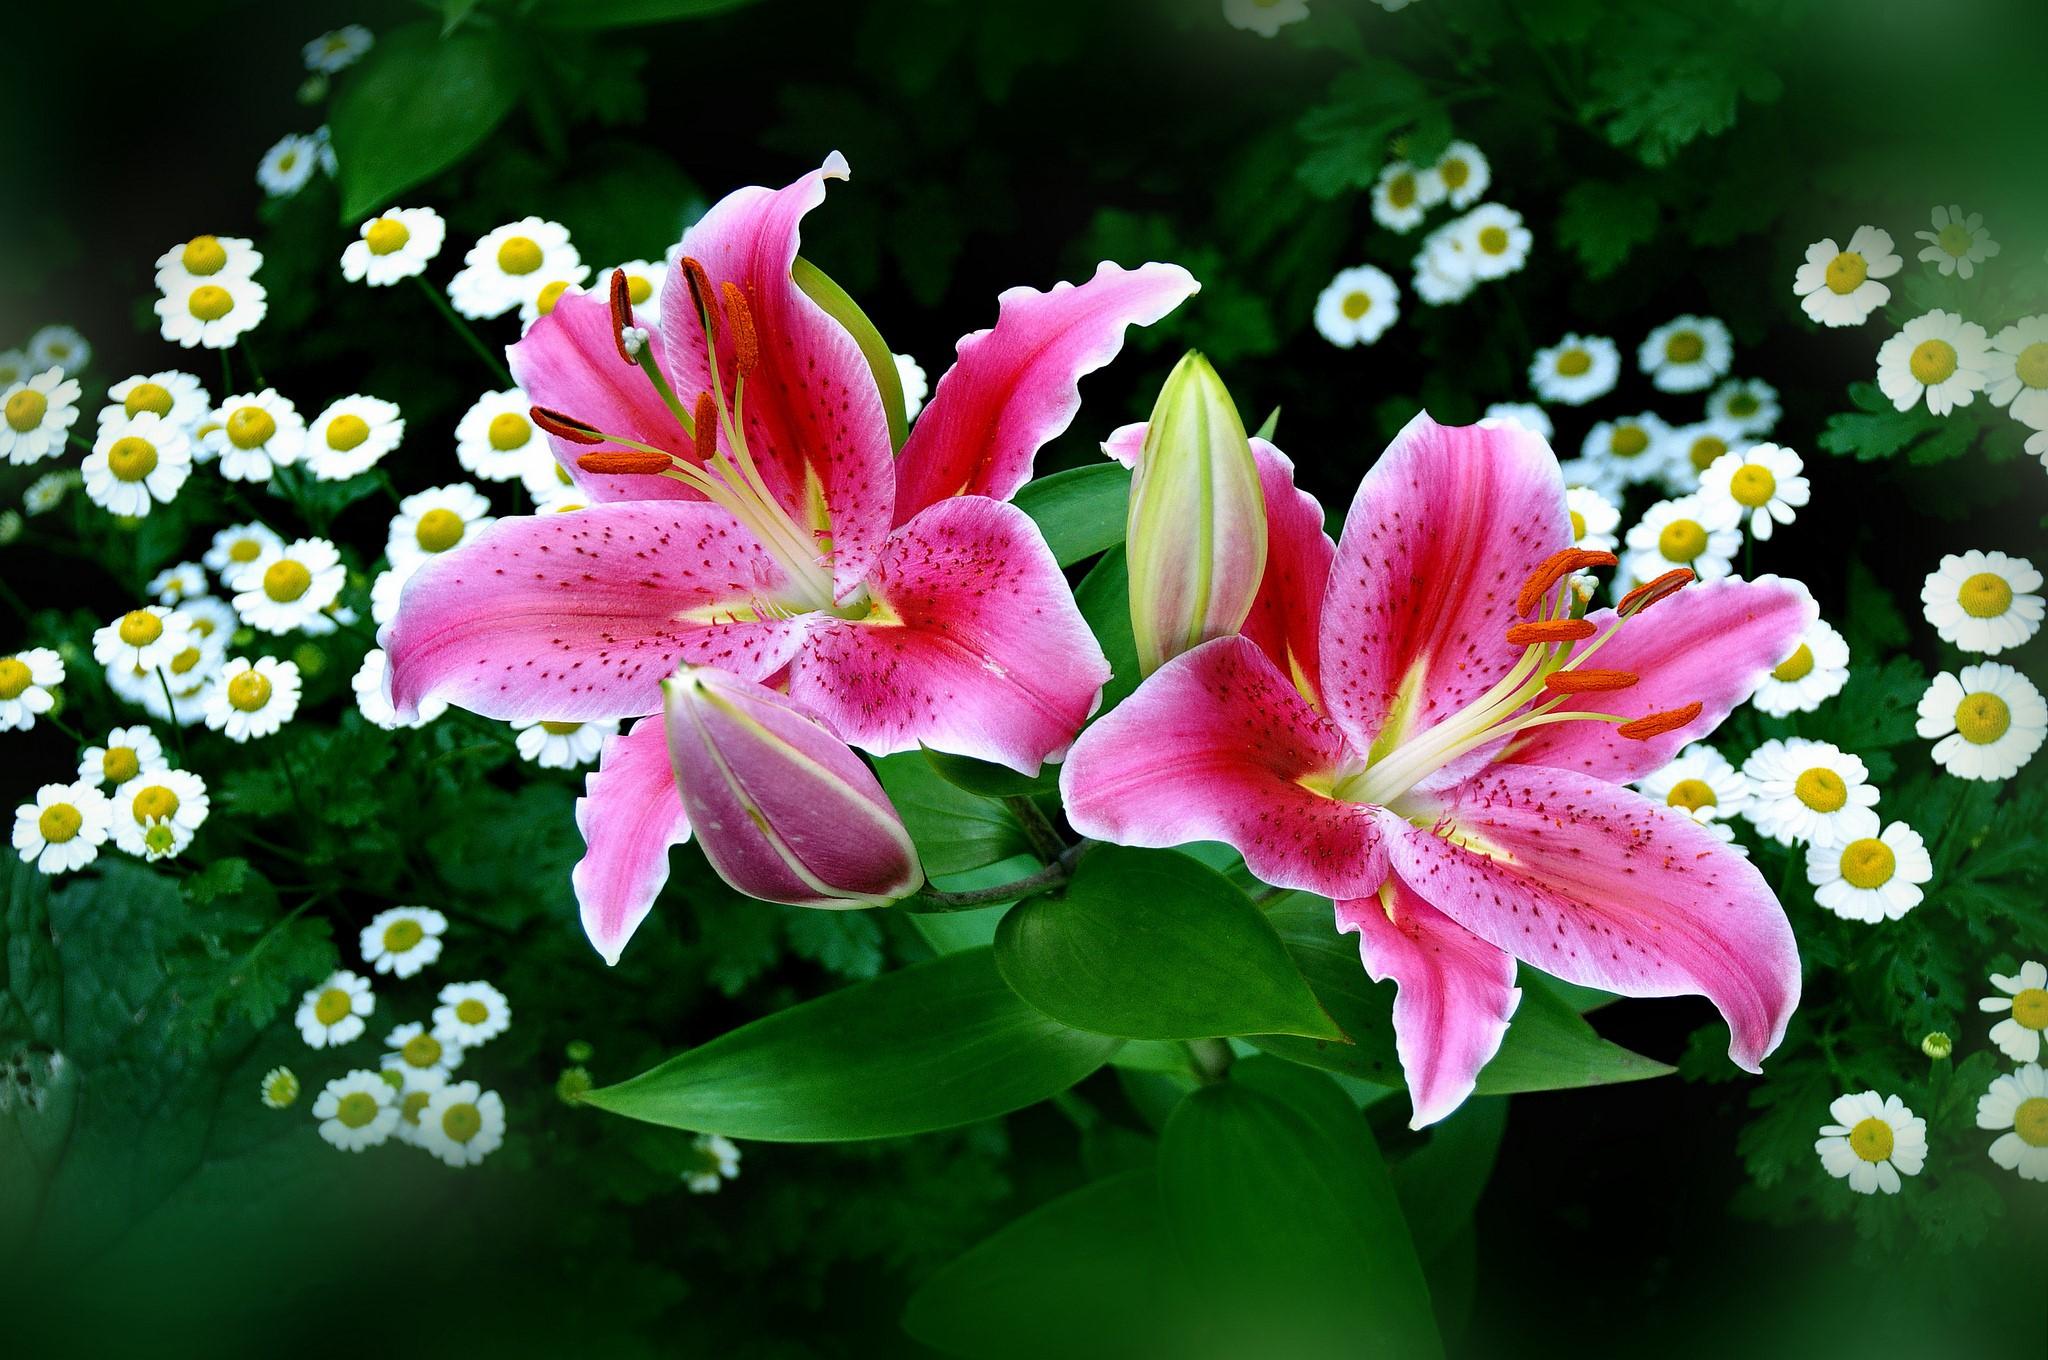 flowers nature white flowers pink flowers lilies wallpaper